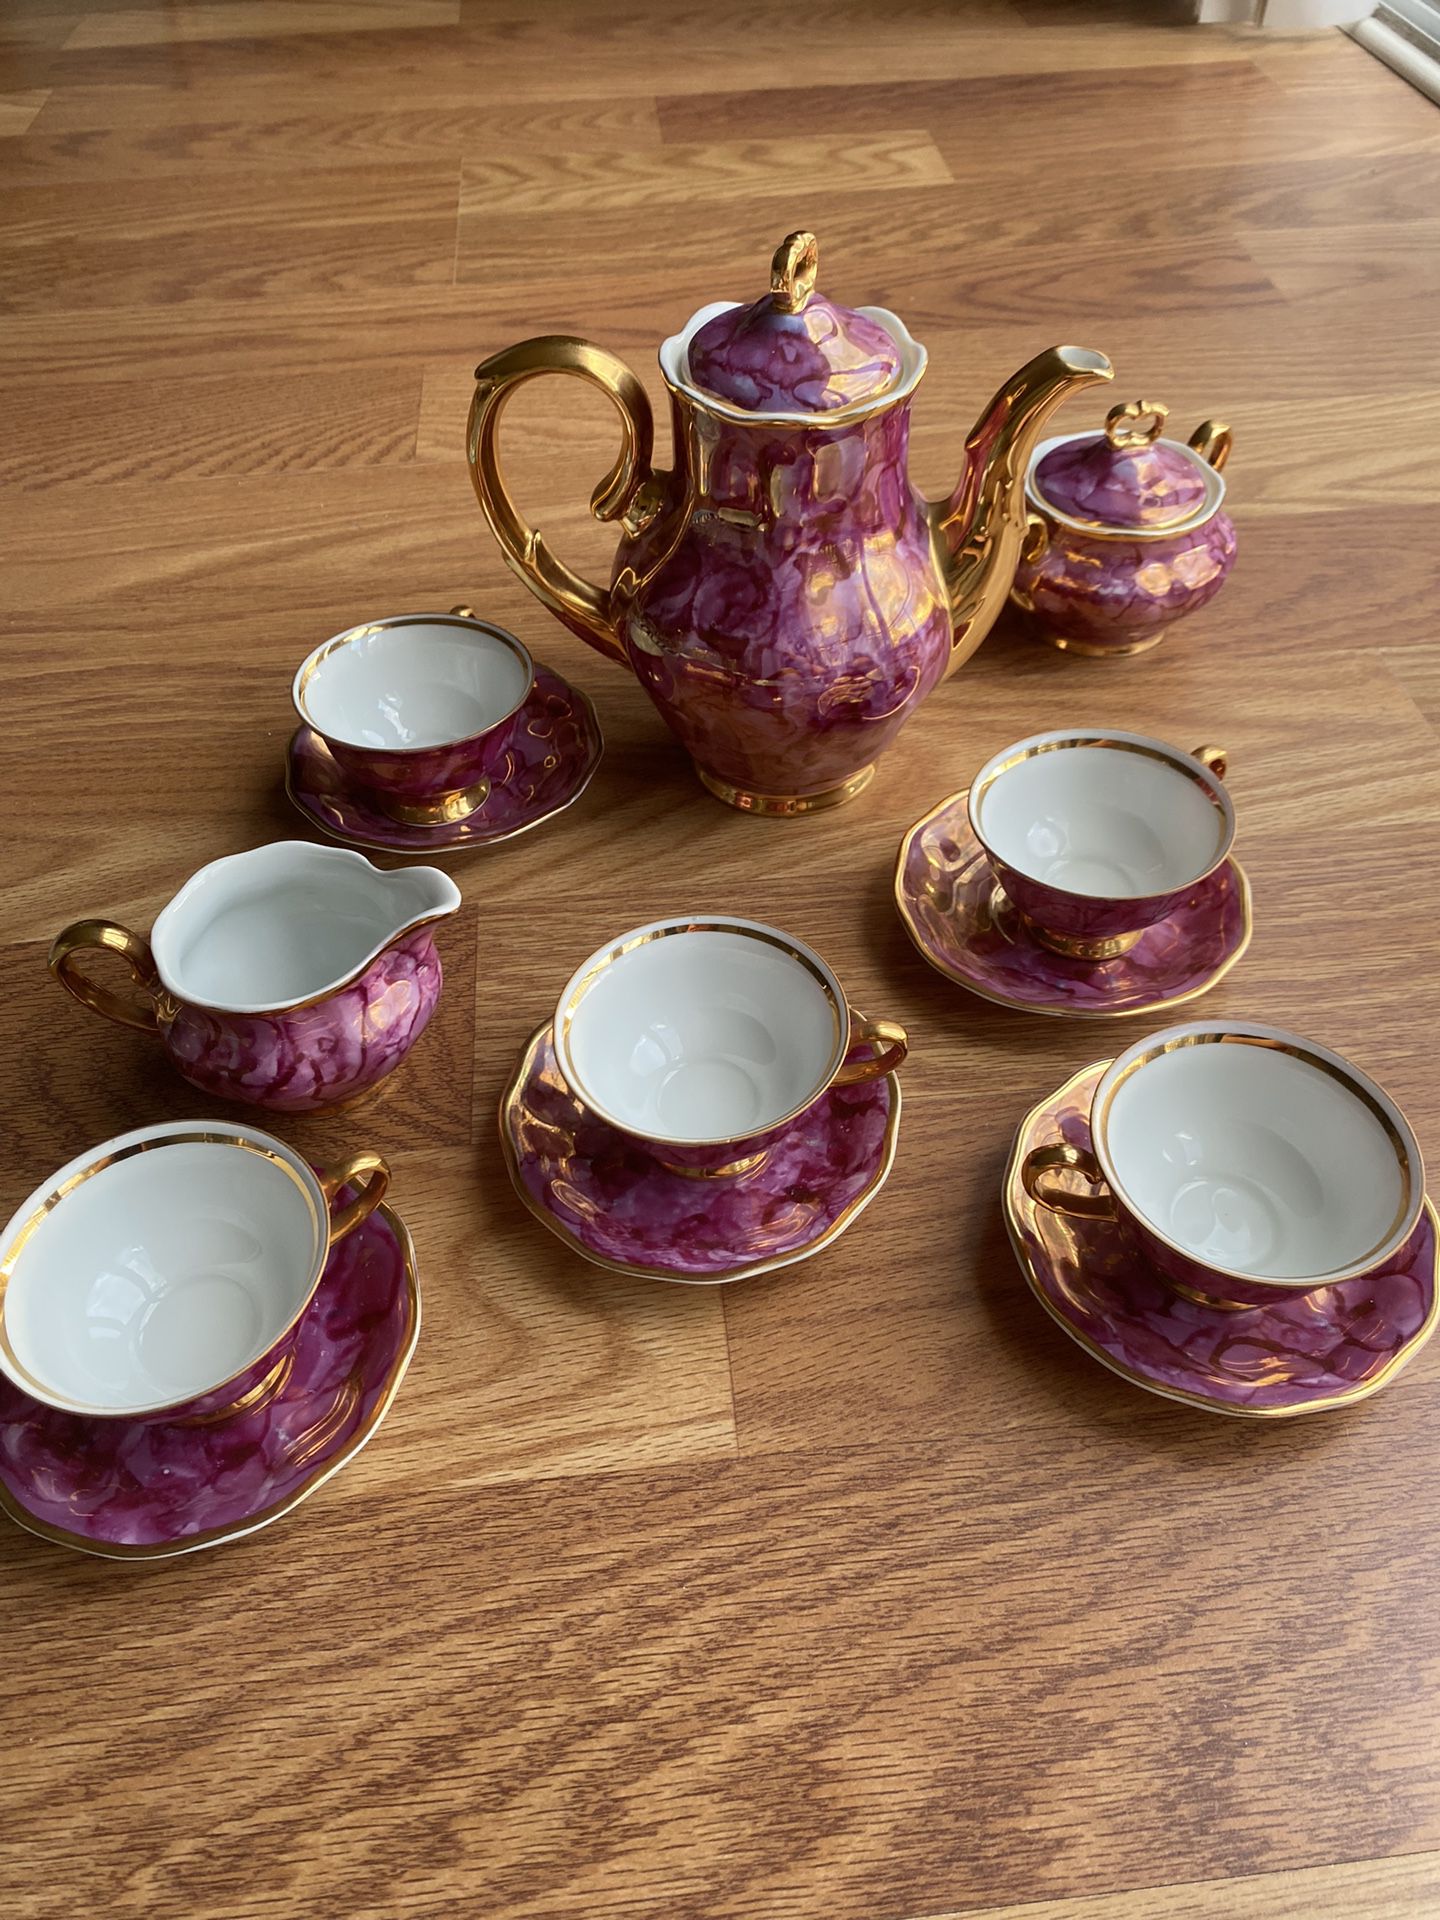 8 Piece Golden Coffee Set From 1960’s